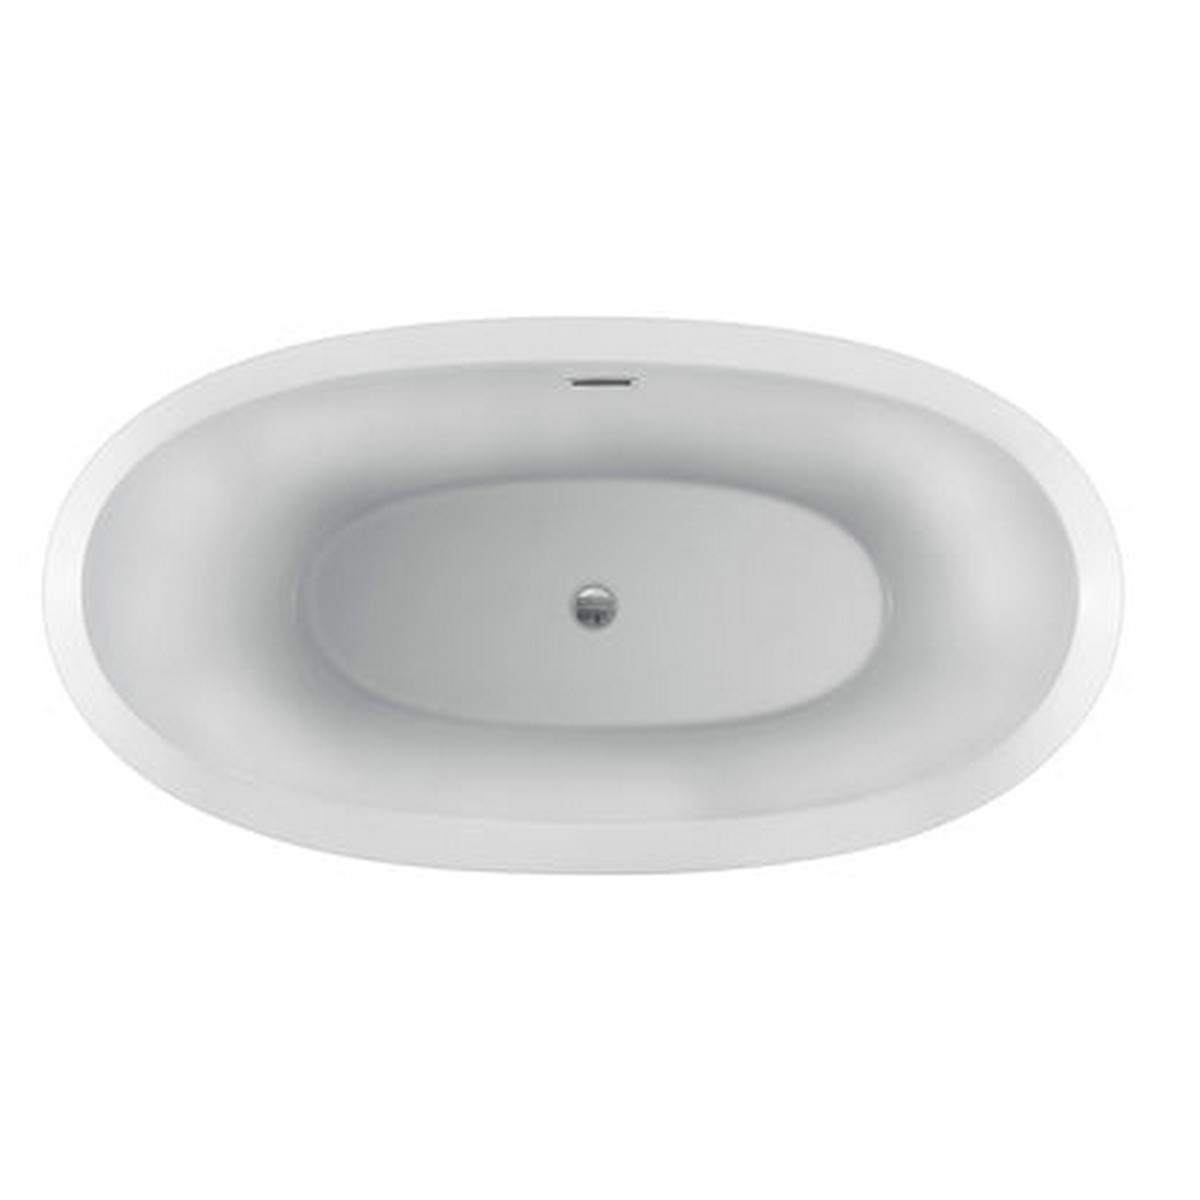 BARCLAY ATDSN67IG NAOMI 66 3/4 INCH ACRYLIC FREESTANDING OVAL SOAKING DOUBLE SLIPPER BATHTUB IN WHITE WITH INTEGRAL DRAIN AND OVERFLOW